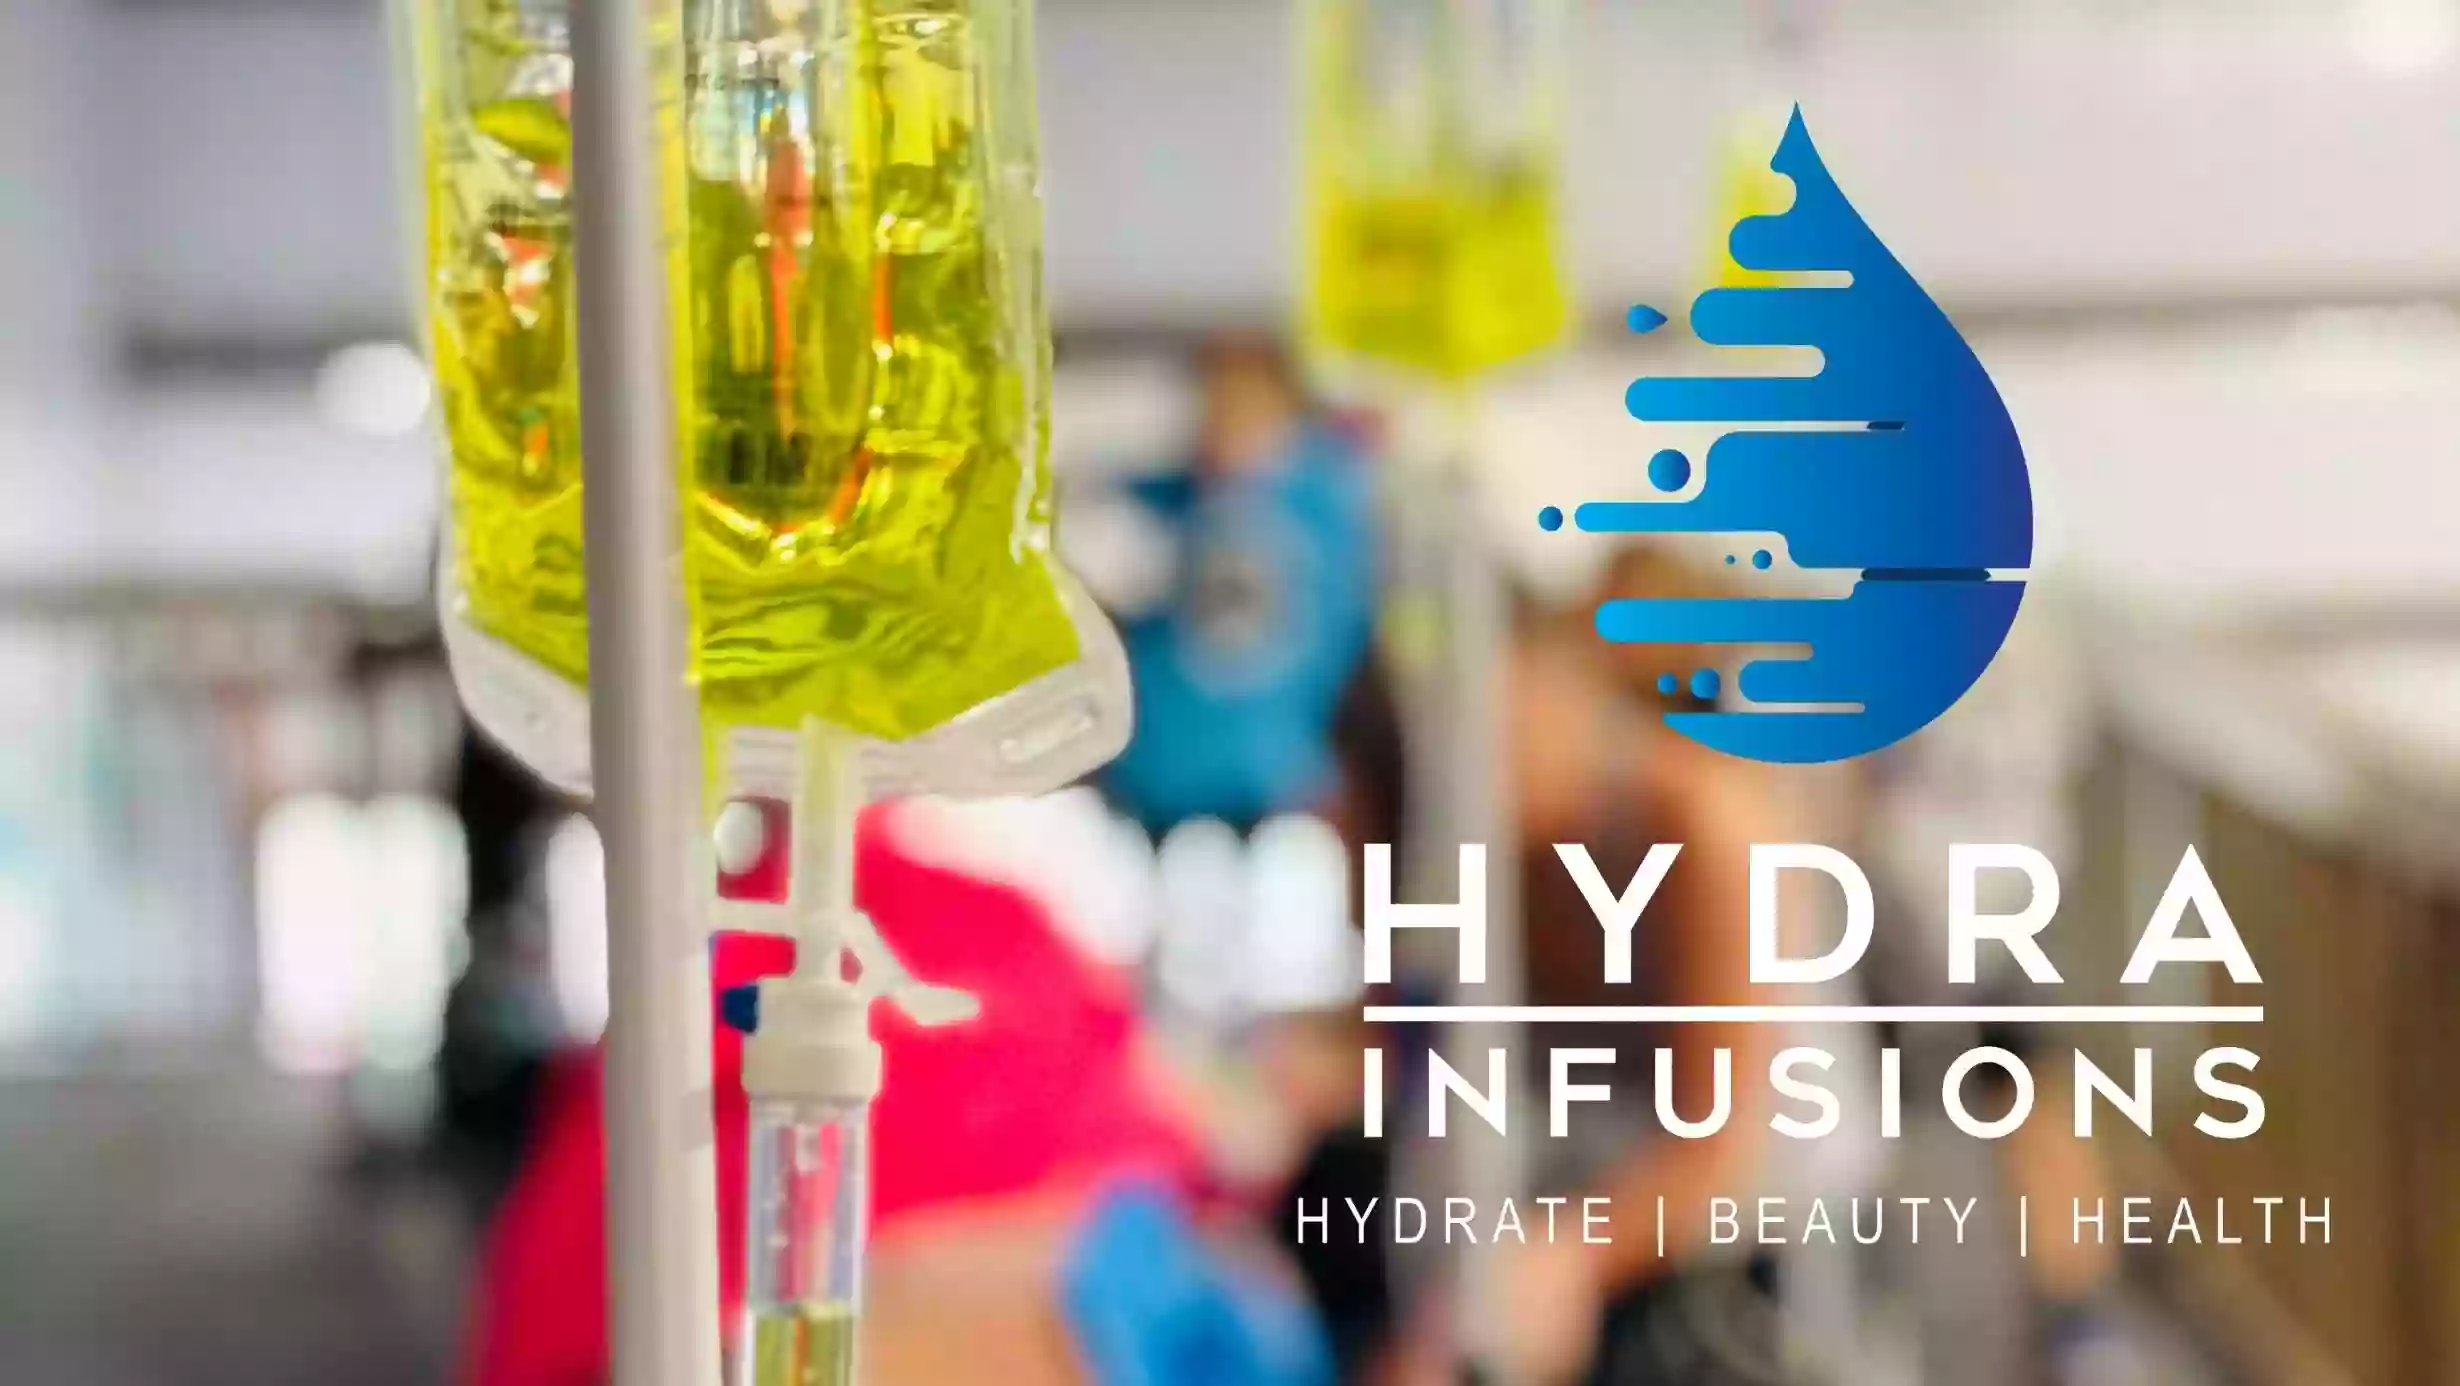 Hydra Infusions